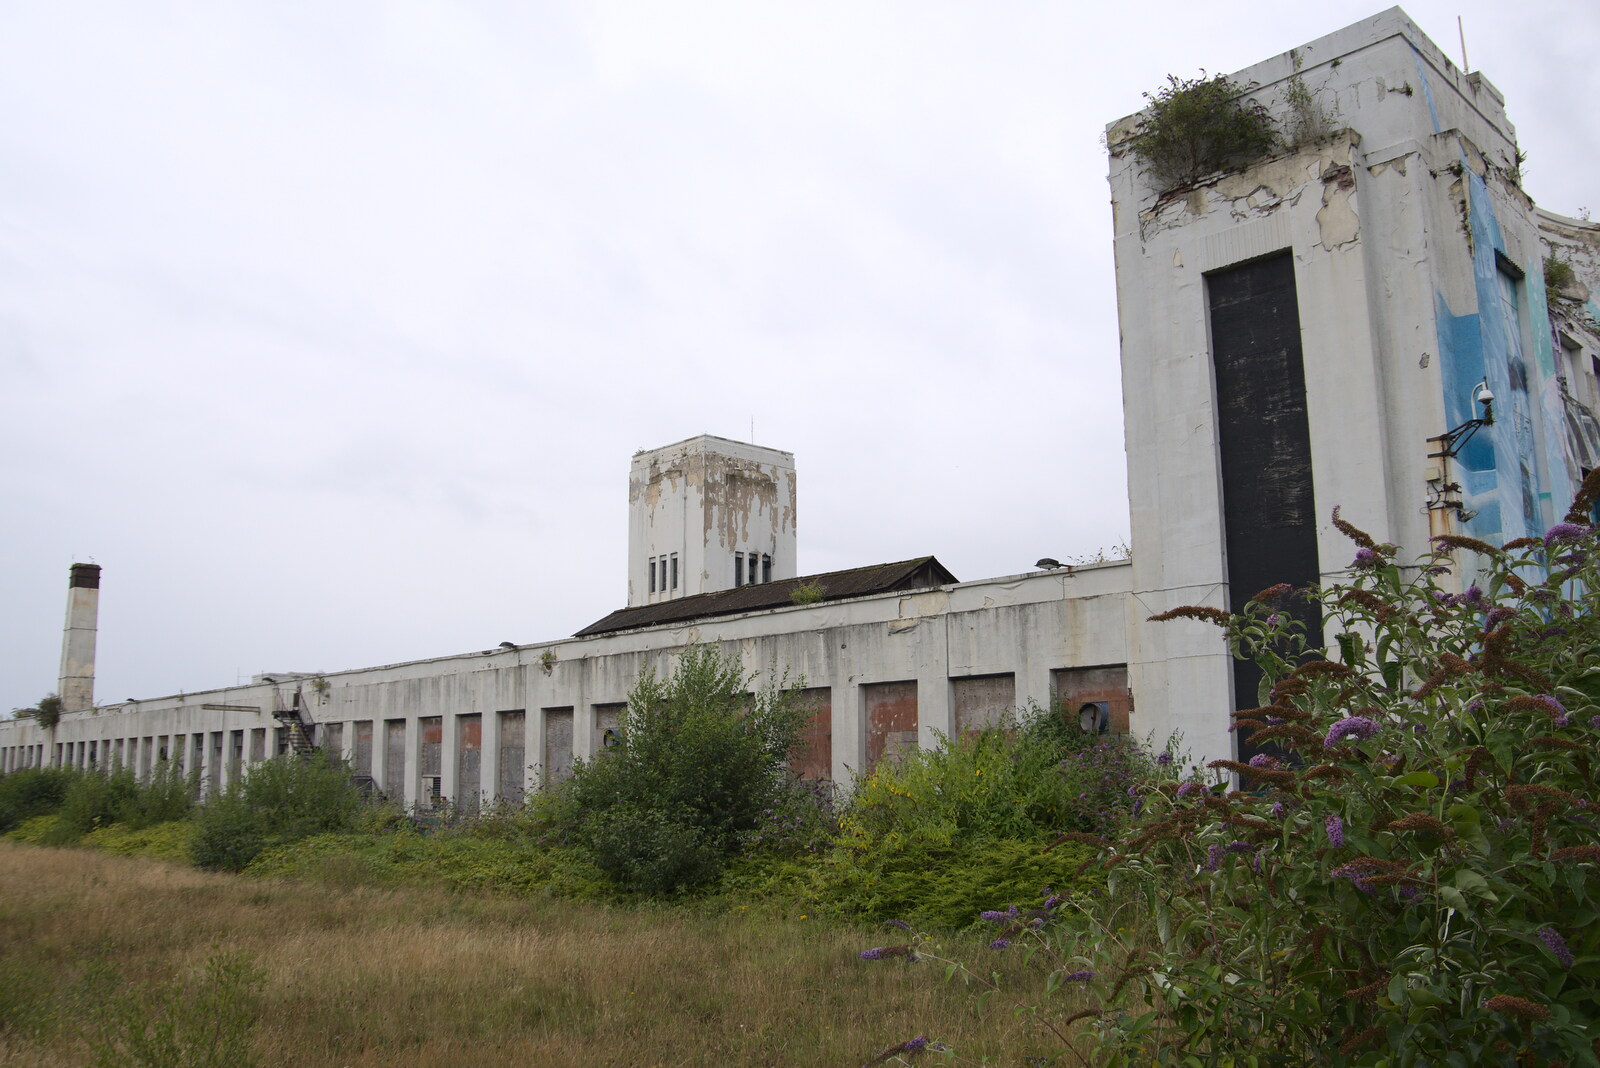 The large and derelict Littlewood's building from Pork Pies and Dockside Dereliction, Melton Mowbray and Liverpool - 7th August 2021